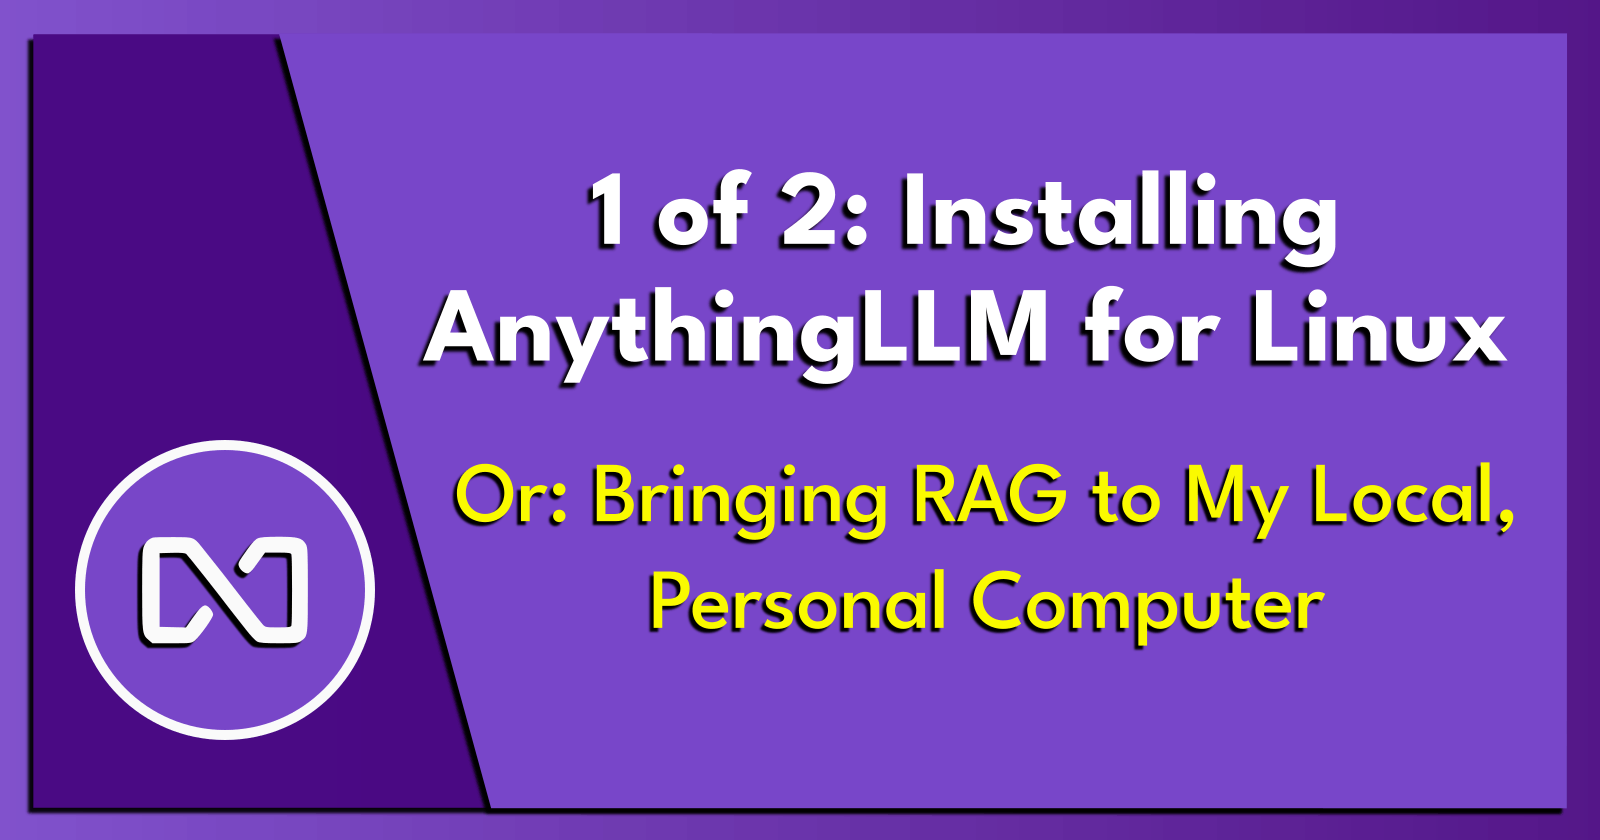 1 of 2: Installing AnythingLLM for Linux.